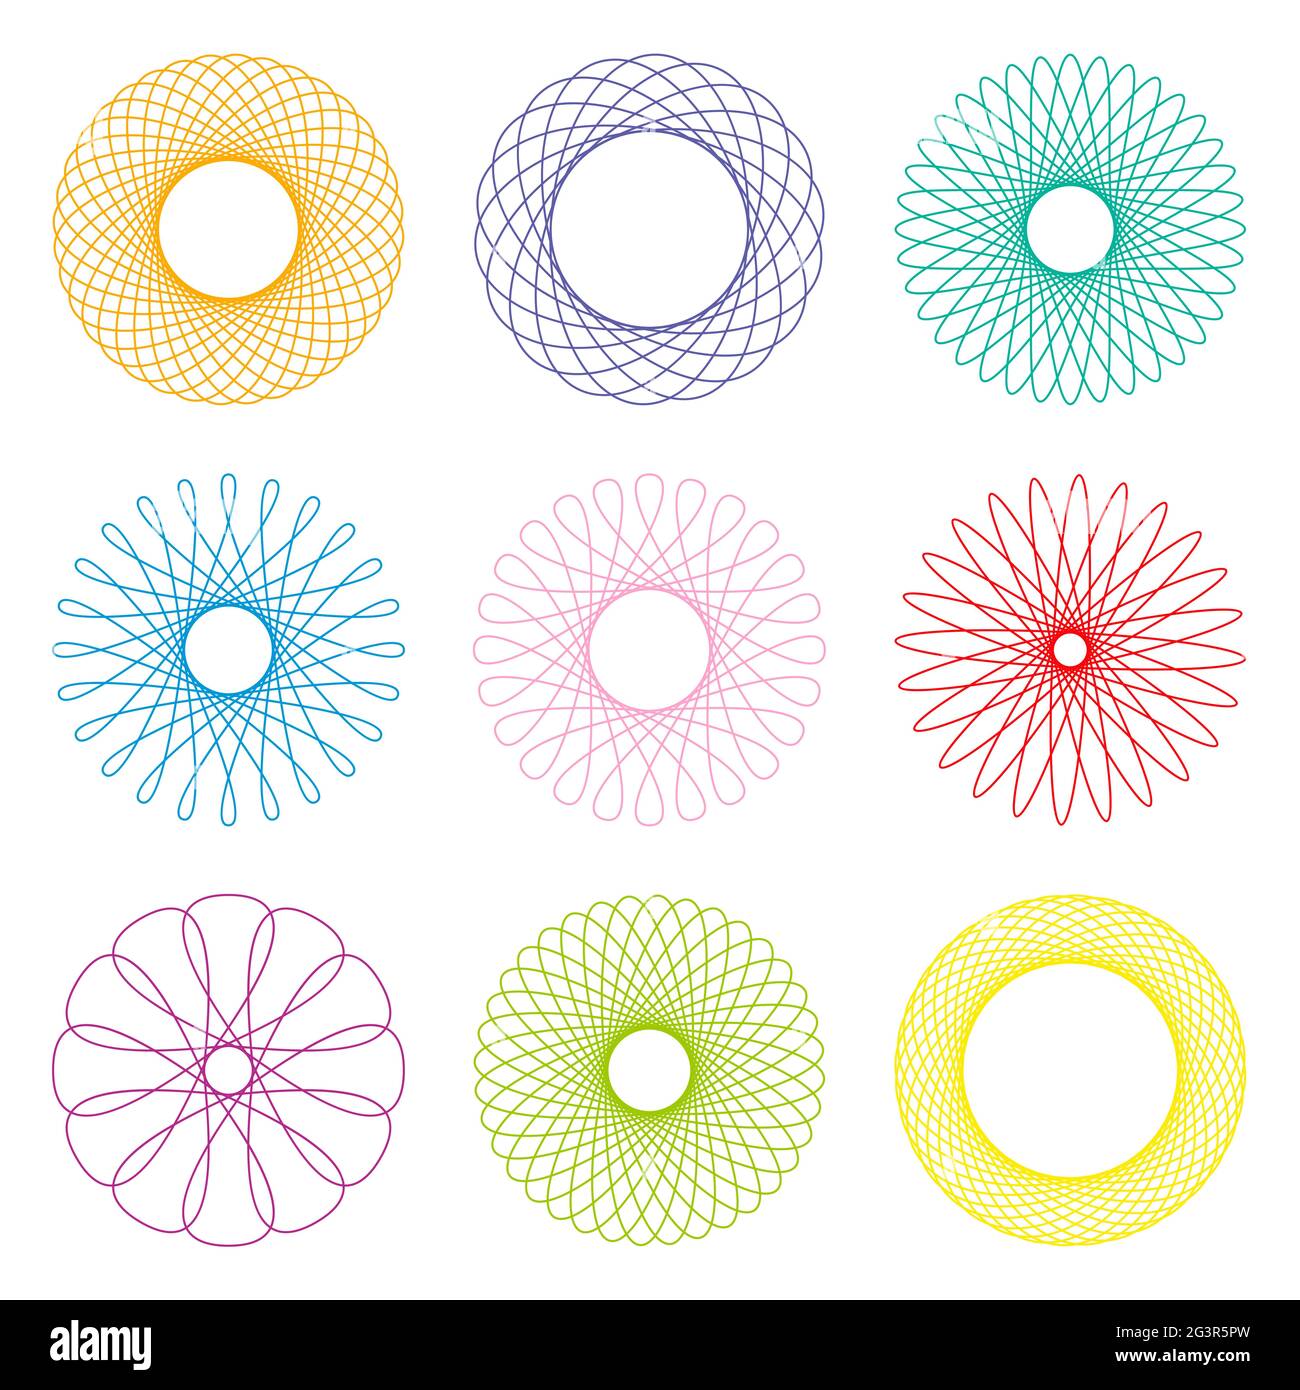 Colored patterns like spirograph drawings - illustration on white background. Stock Photo